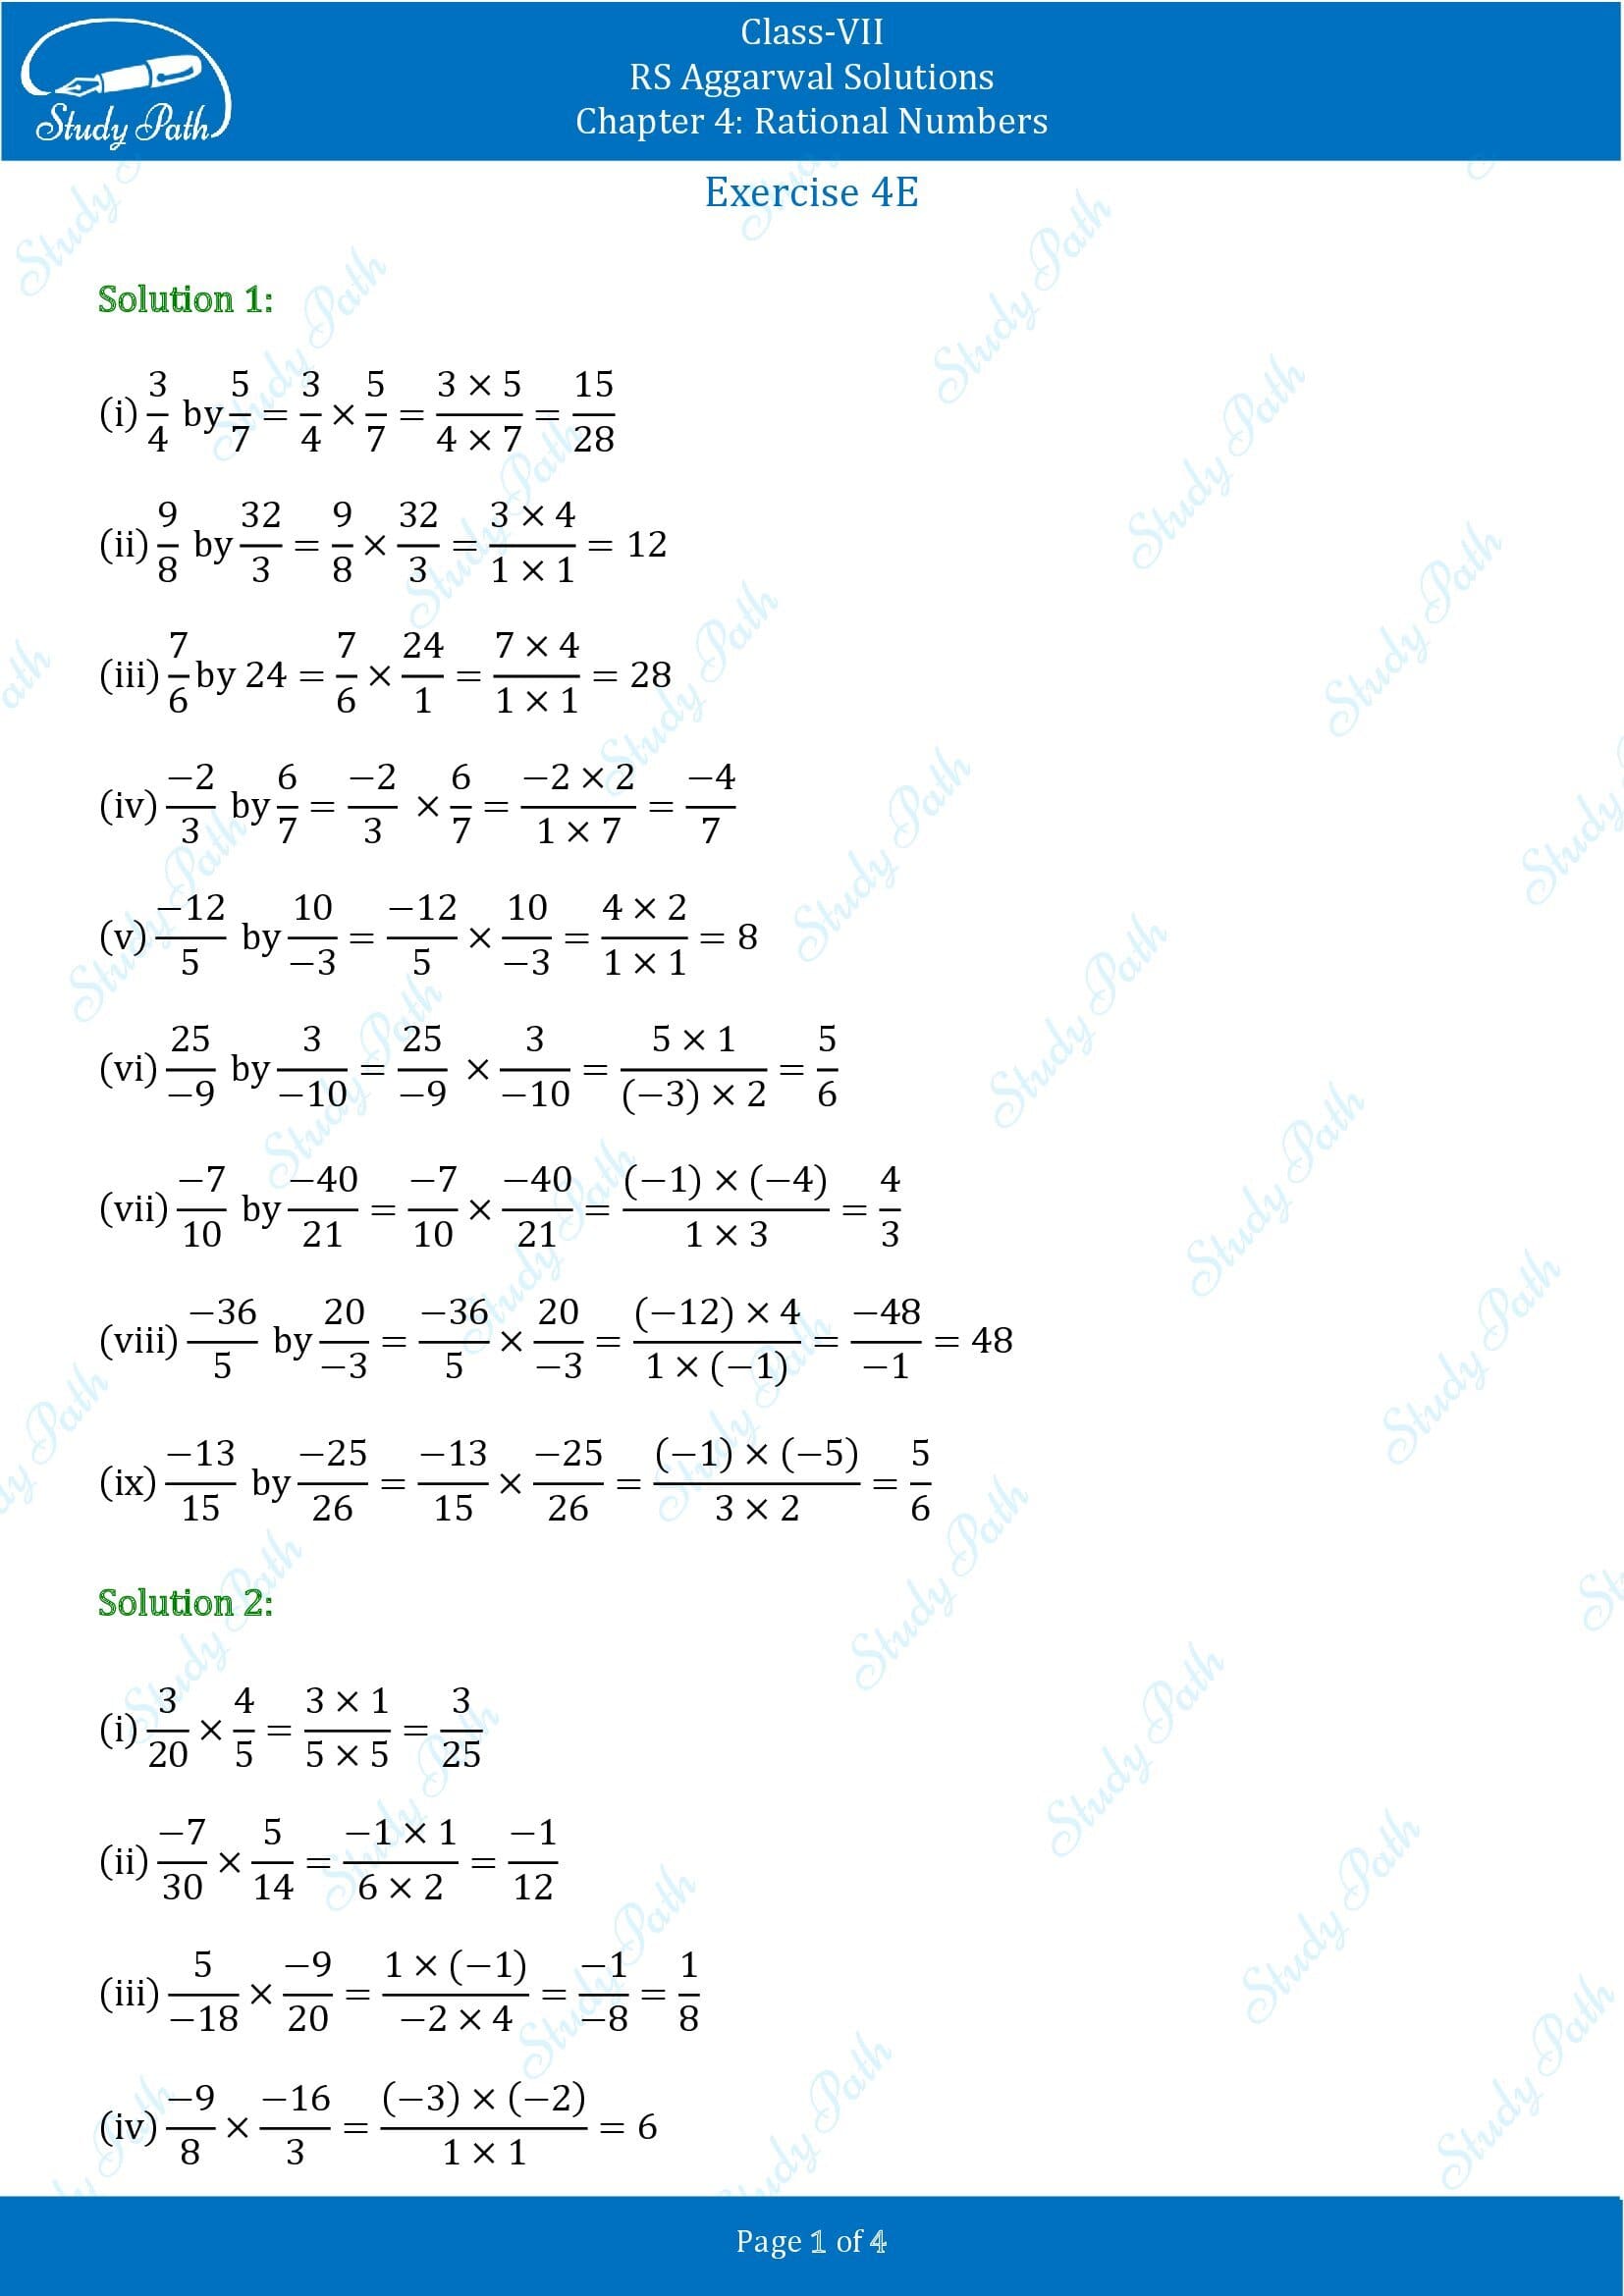 RS Aggarwal Solutions Class 7 Chapter 4 Rational Numbers Exercise 4E 00001